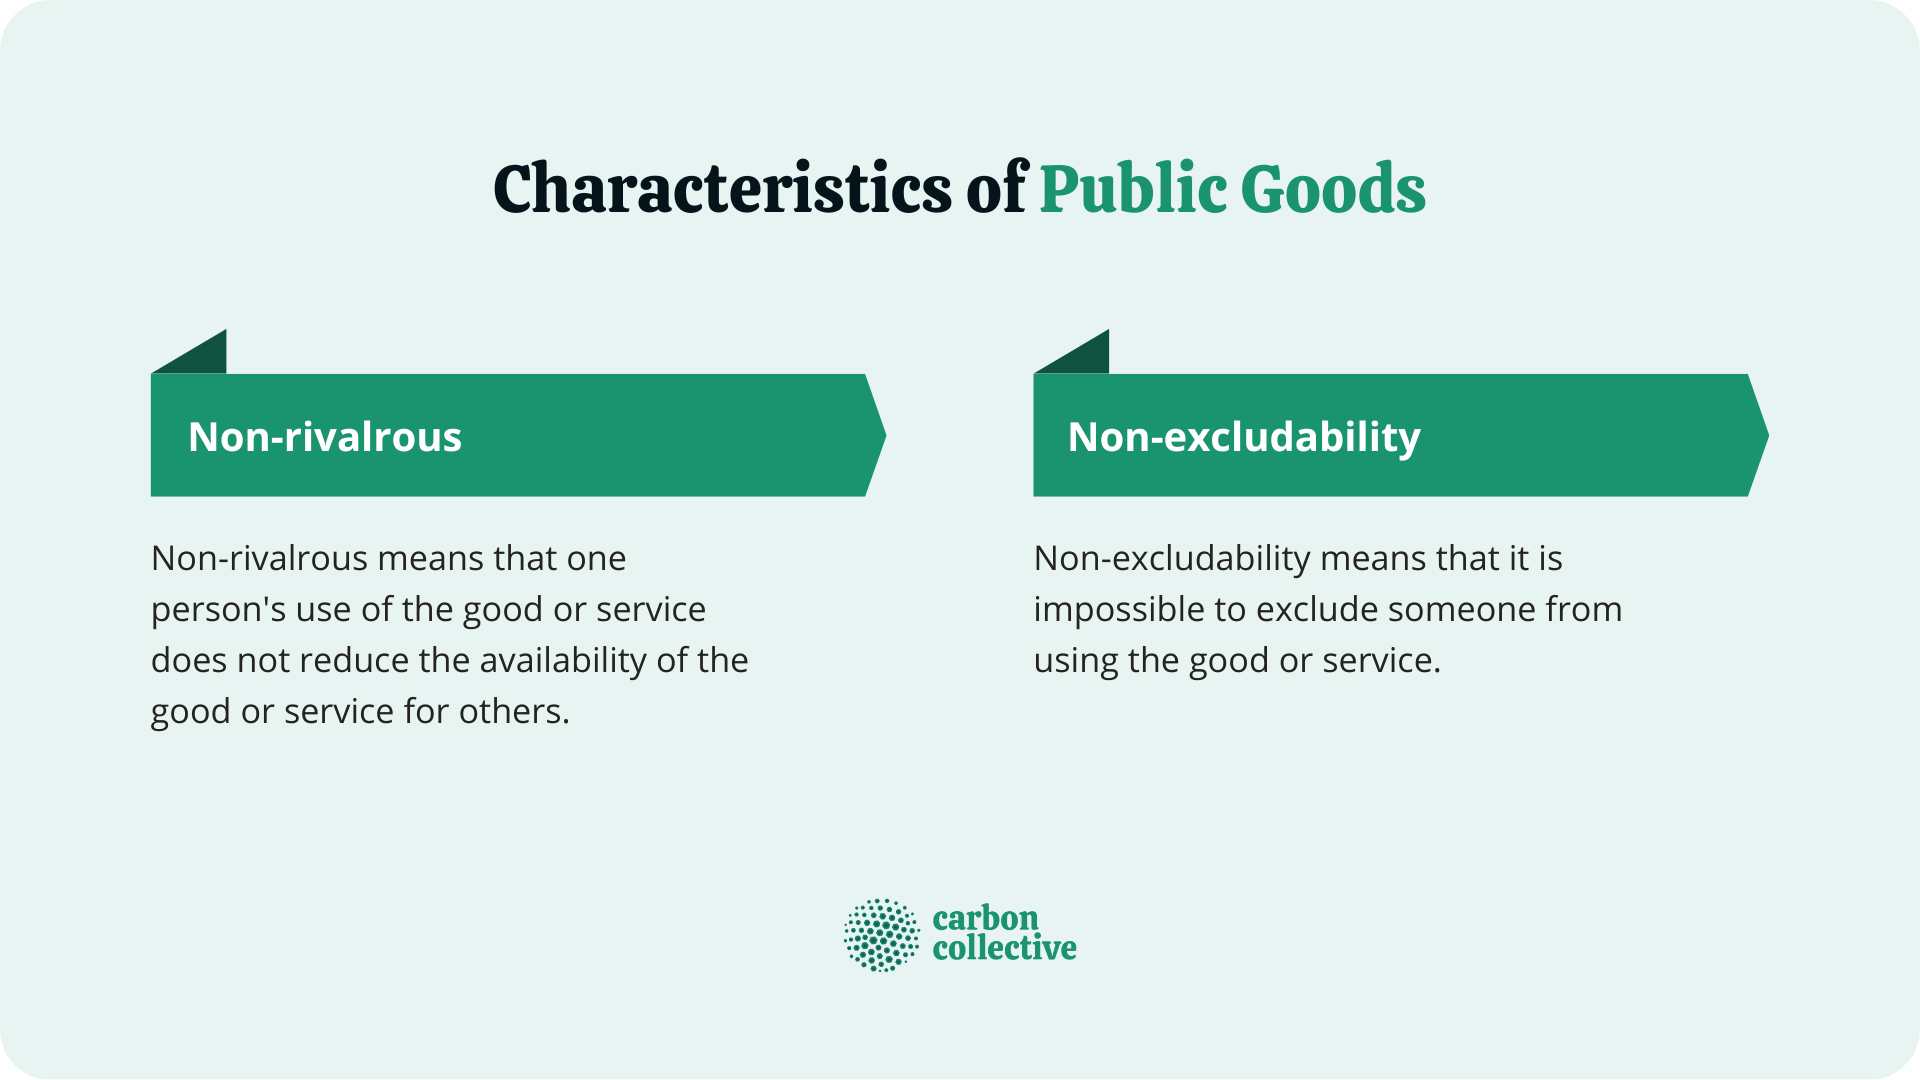 https://www.carboncollective.co/hs-fs/hubfs/Characteristics_of_Public_Goods.png?width=1920&height=1080&name=Characteristics_of_Public_Goods.png